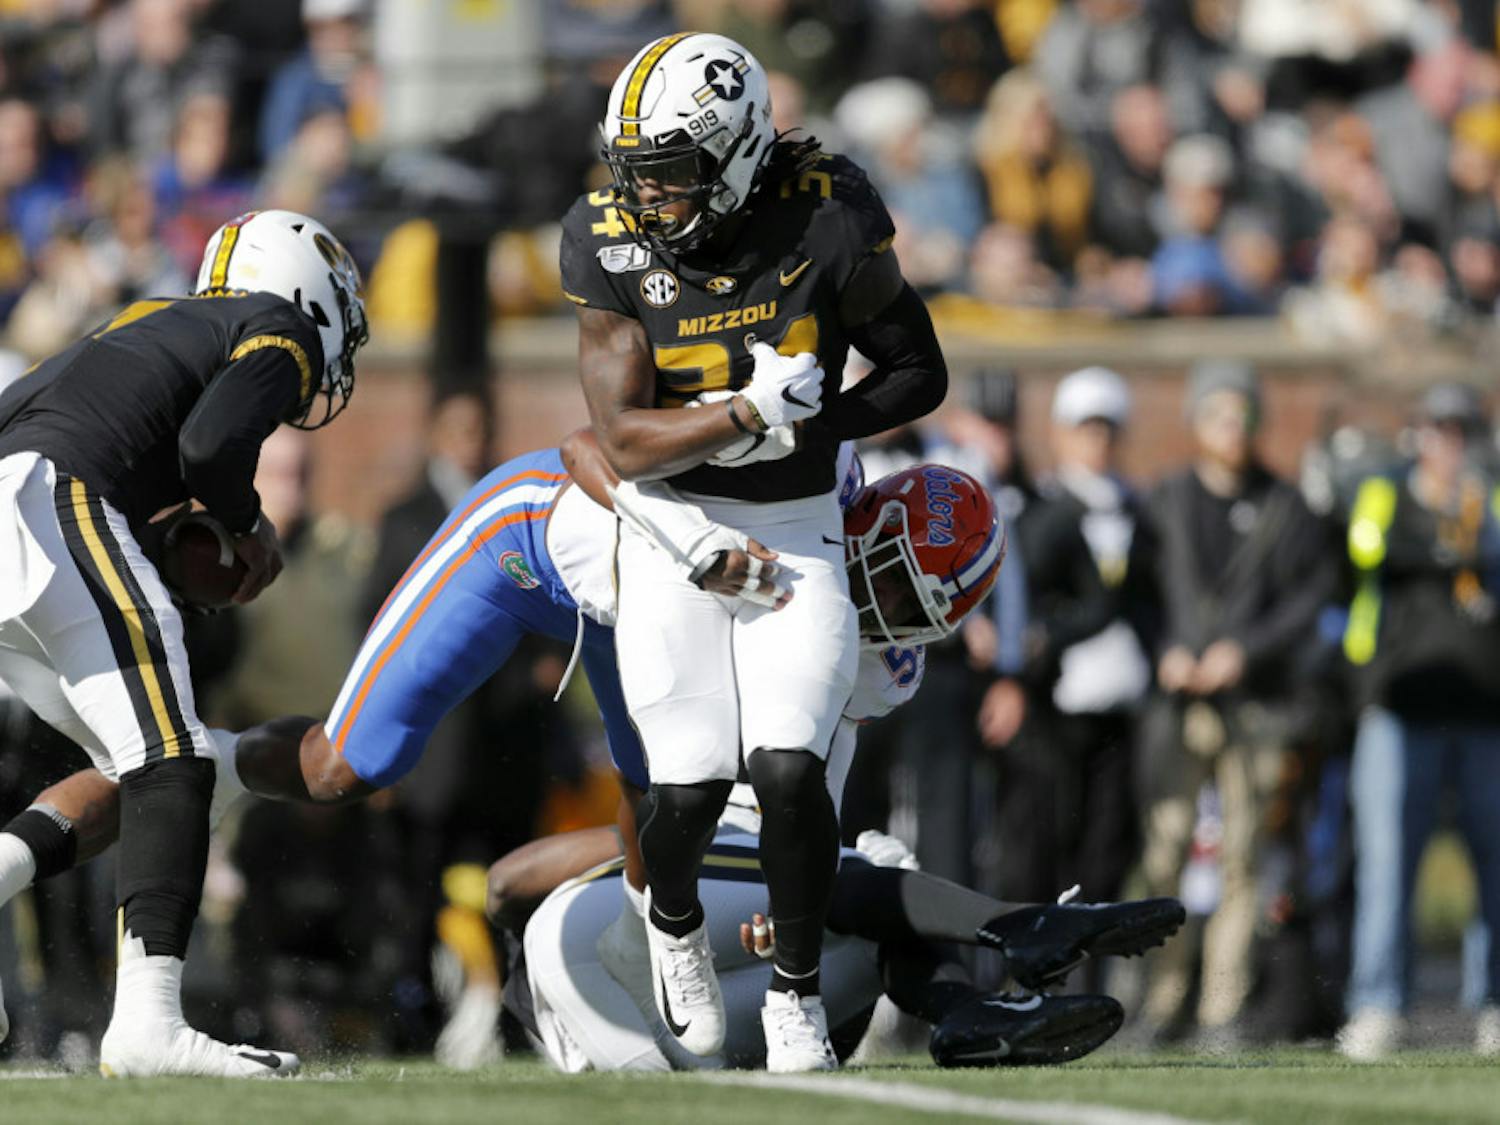 Missouri running back Larry Rountree III, front, struggles for yardage before being pulled down by Florida linebacker Jonathan Greenard during the first half of an NCAA college football game Saturday, Nov. 16, 2019, in Columbia, Mo. (AP Photo/Jeff Roberson)